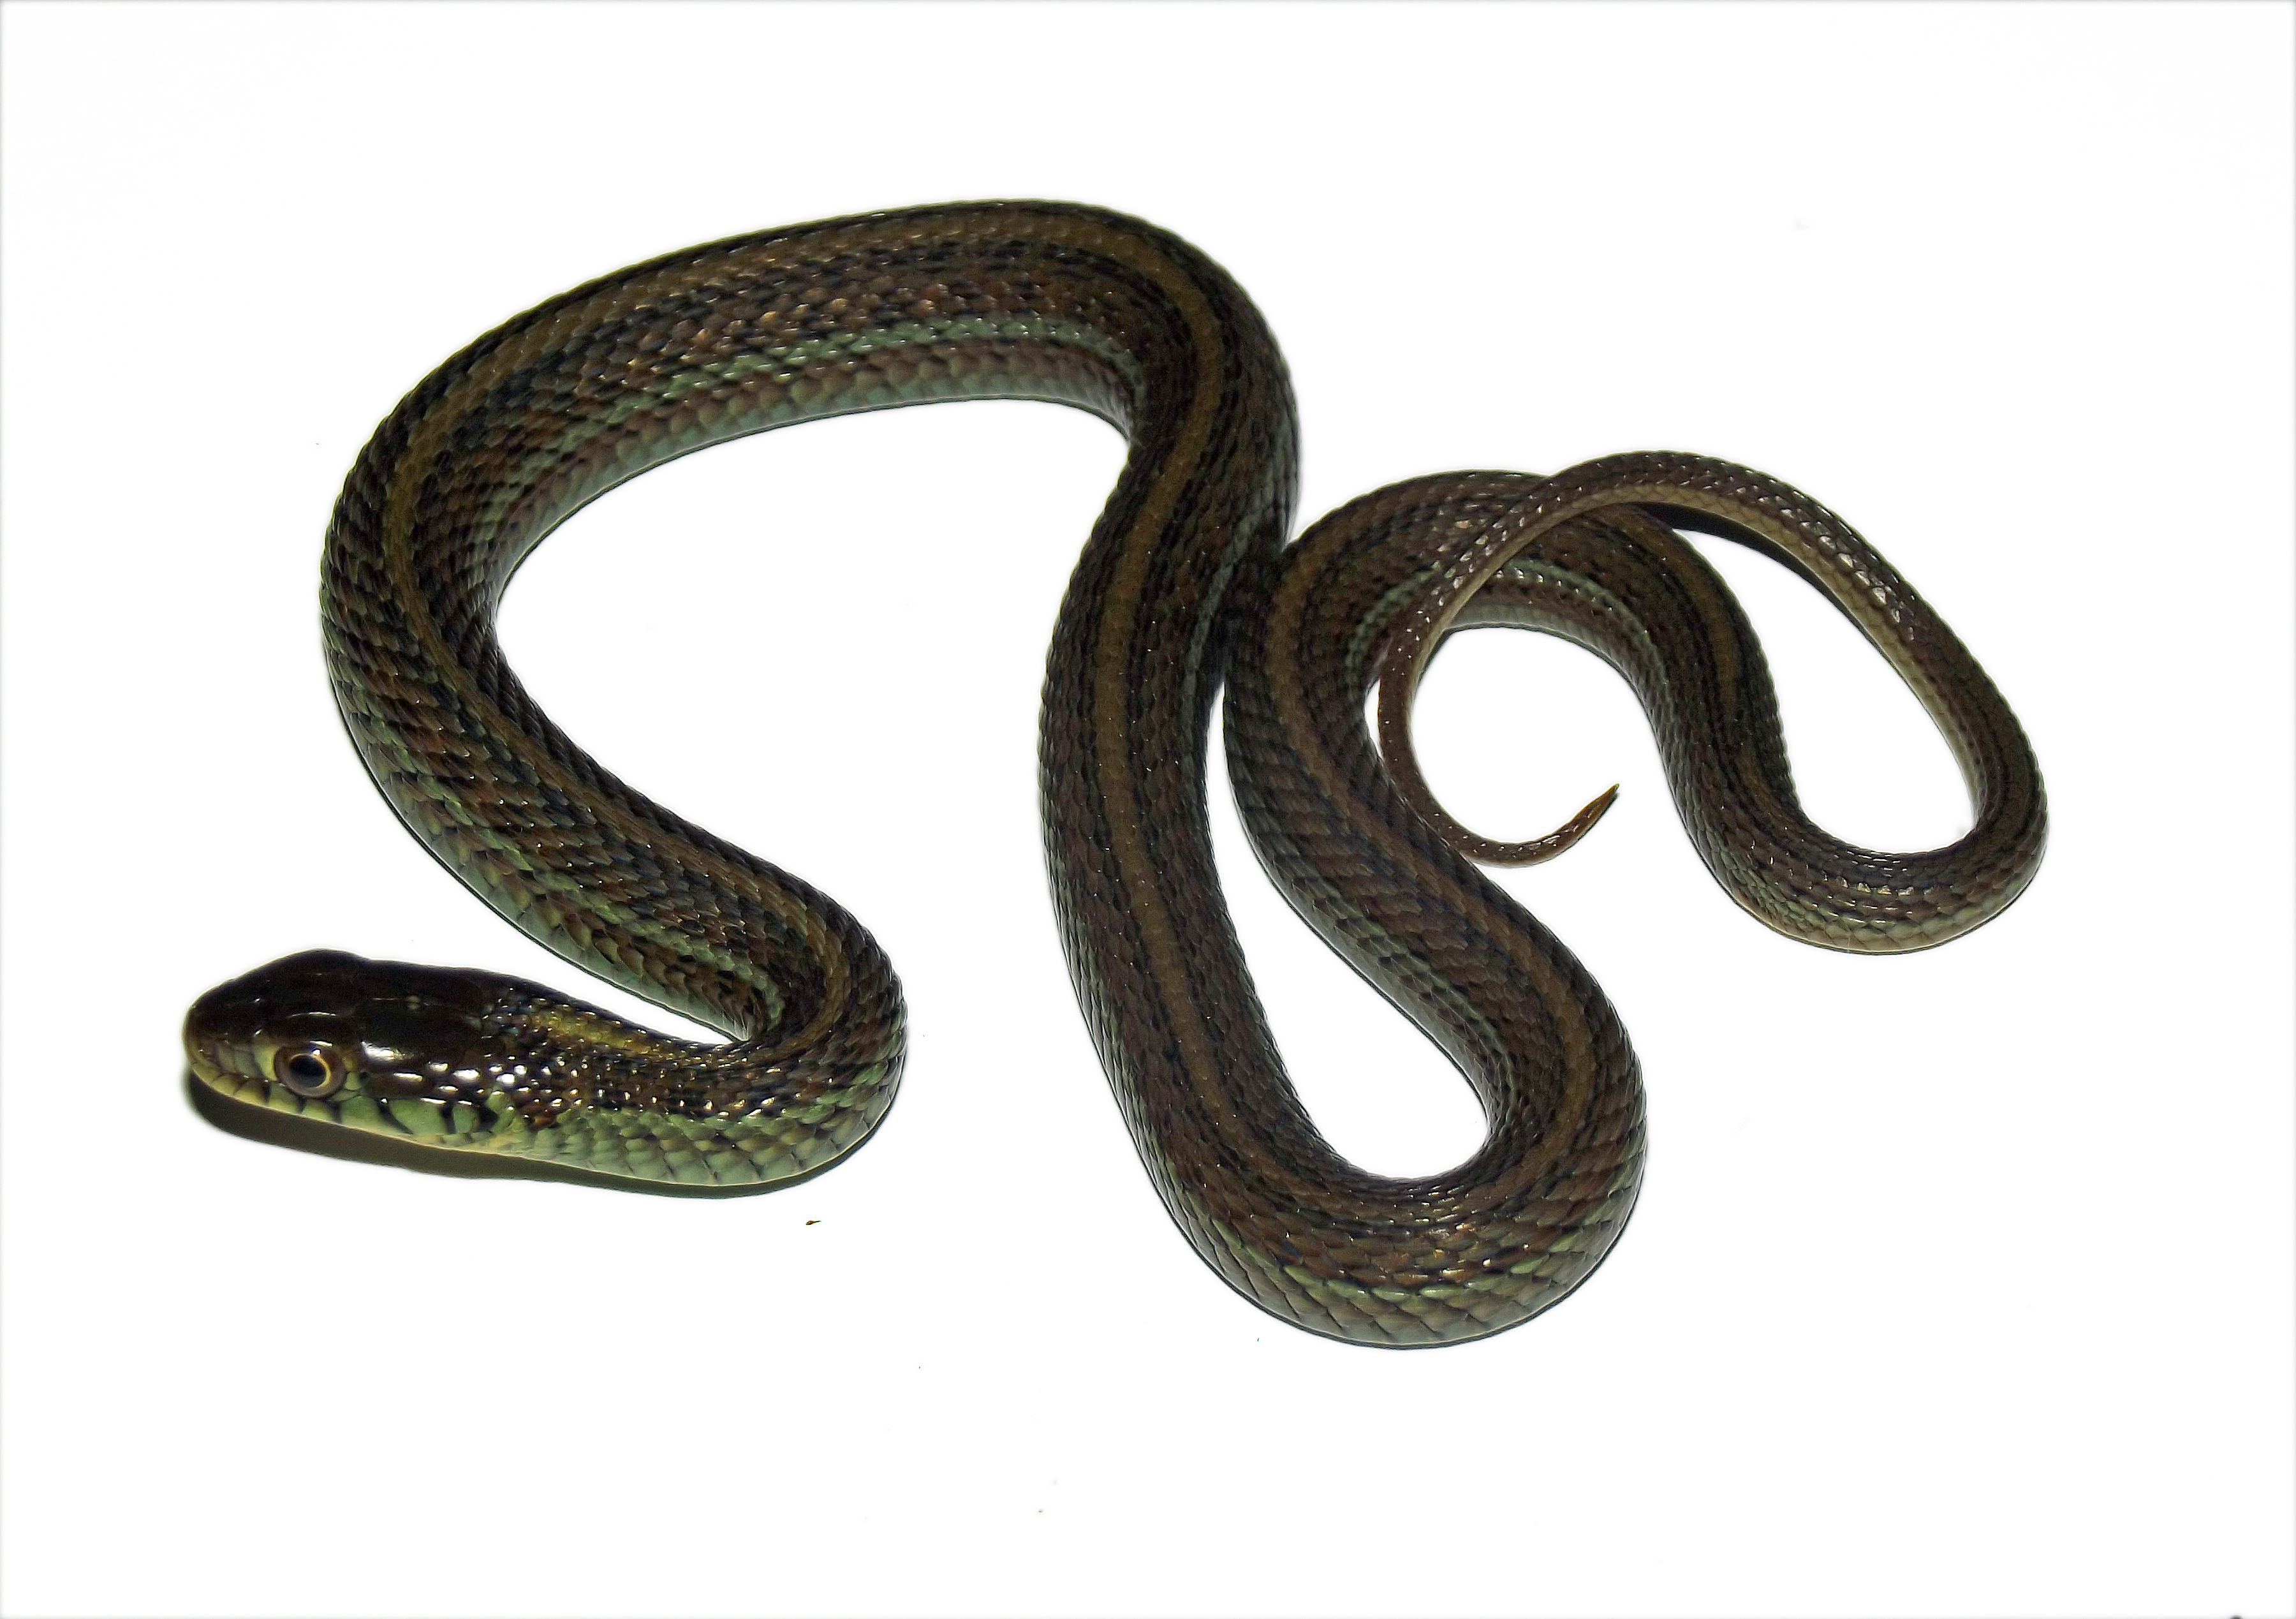 copy68_thamnophis eques obscurus 1